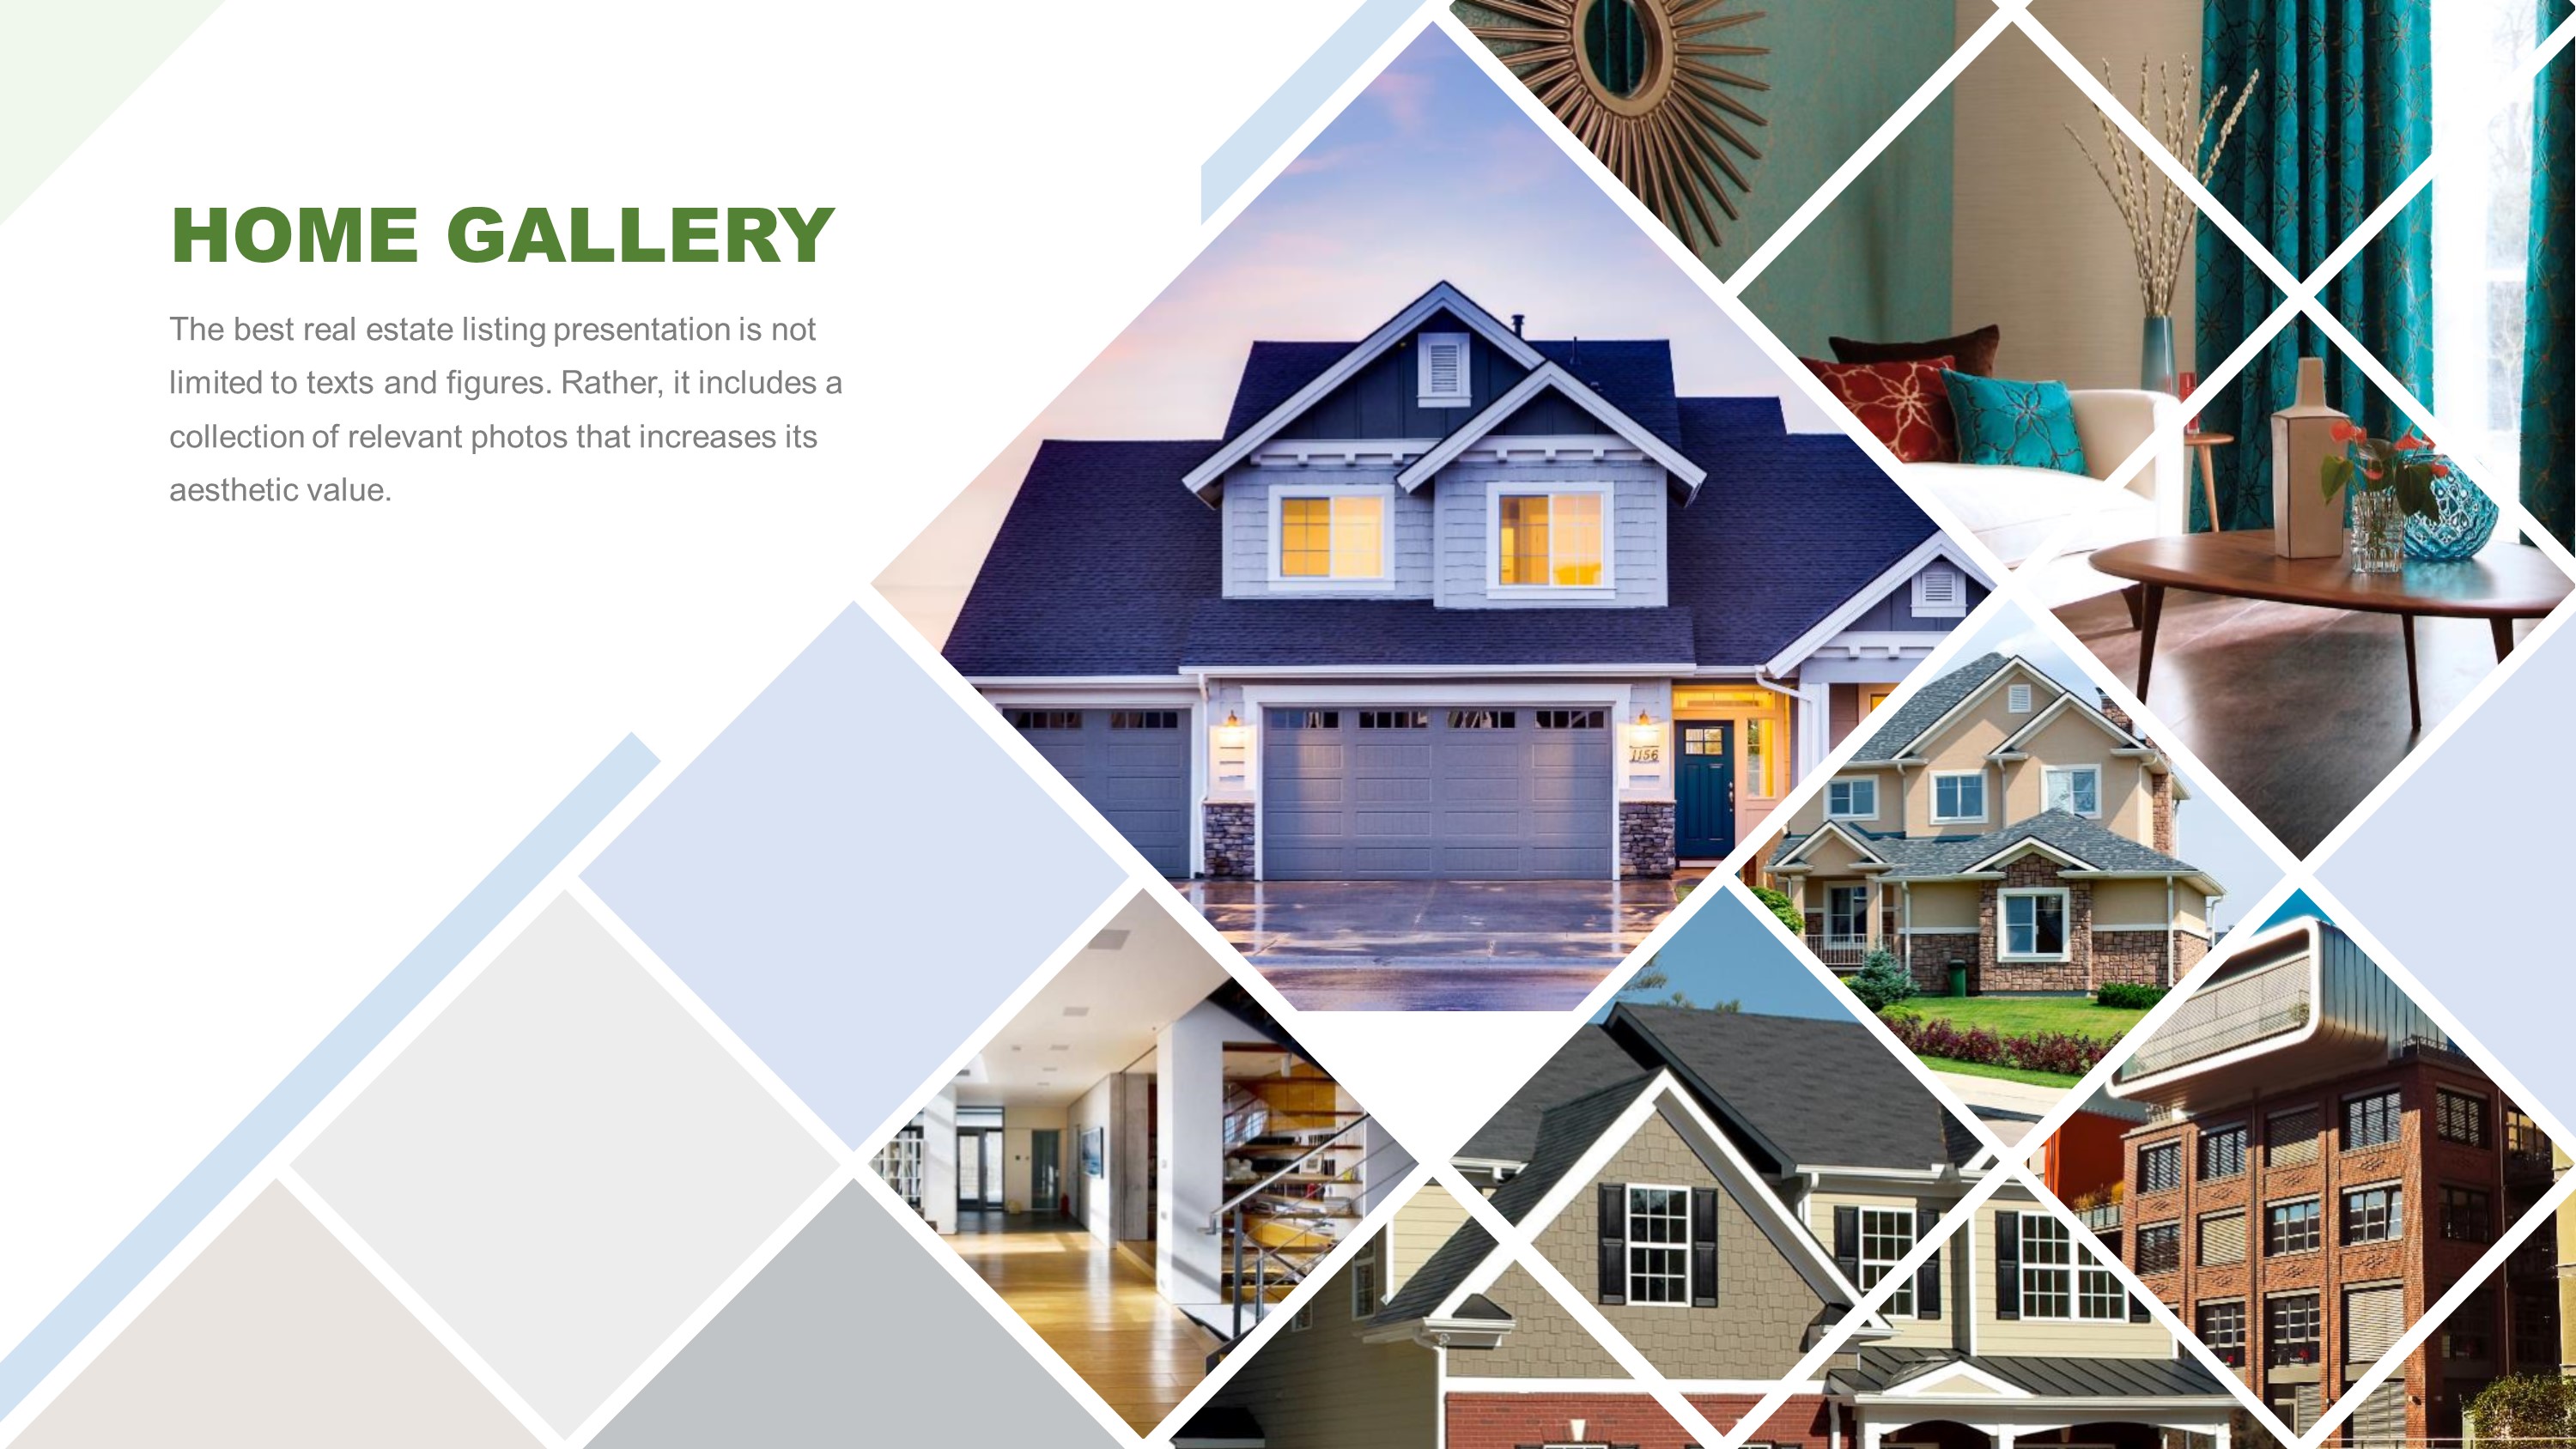 Real Estate Home Gallery PowerPoint Slide